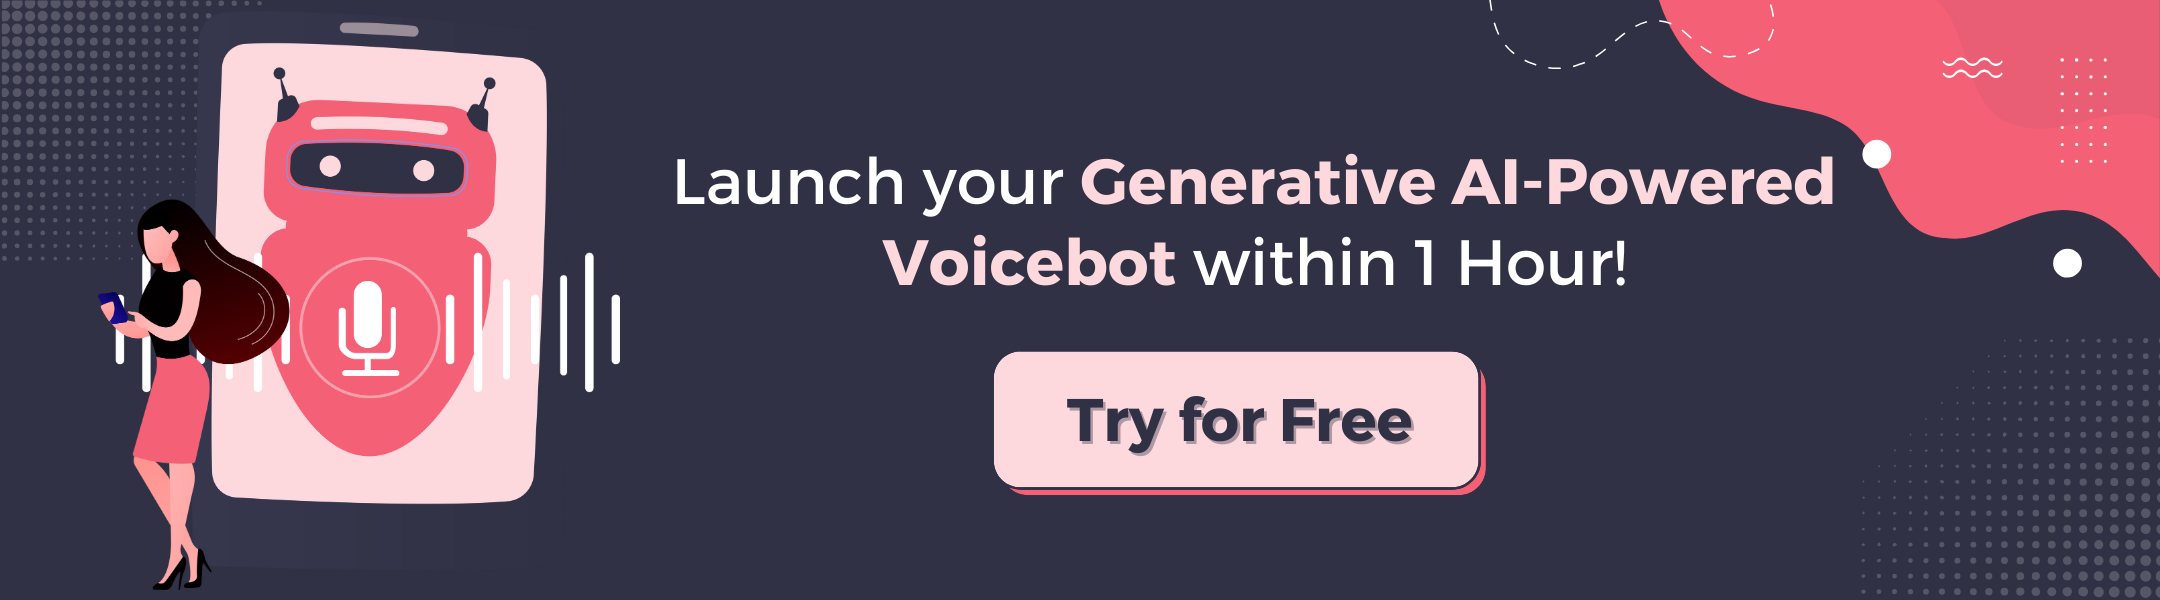 Launch Voicebot in 1 Hour